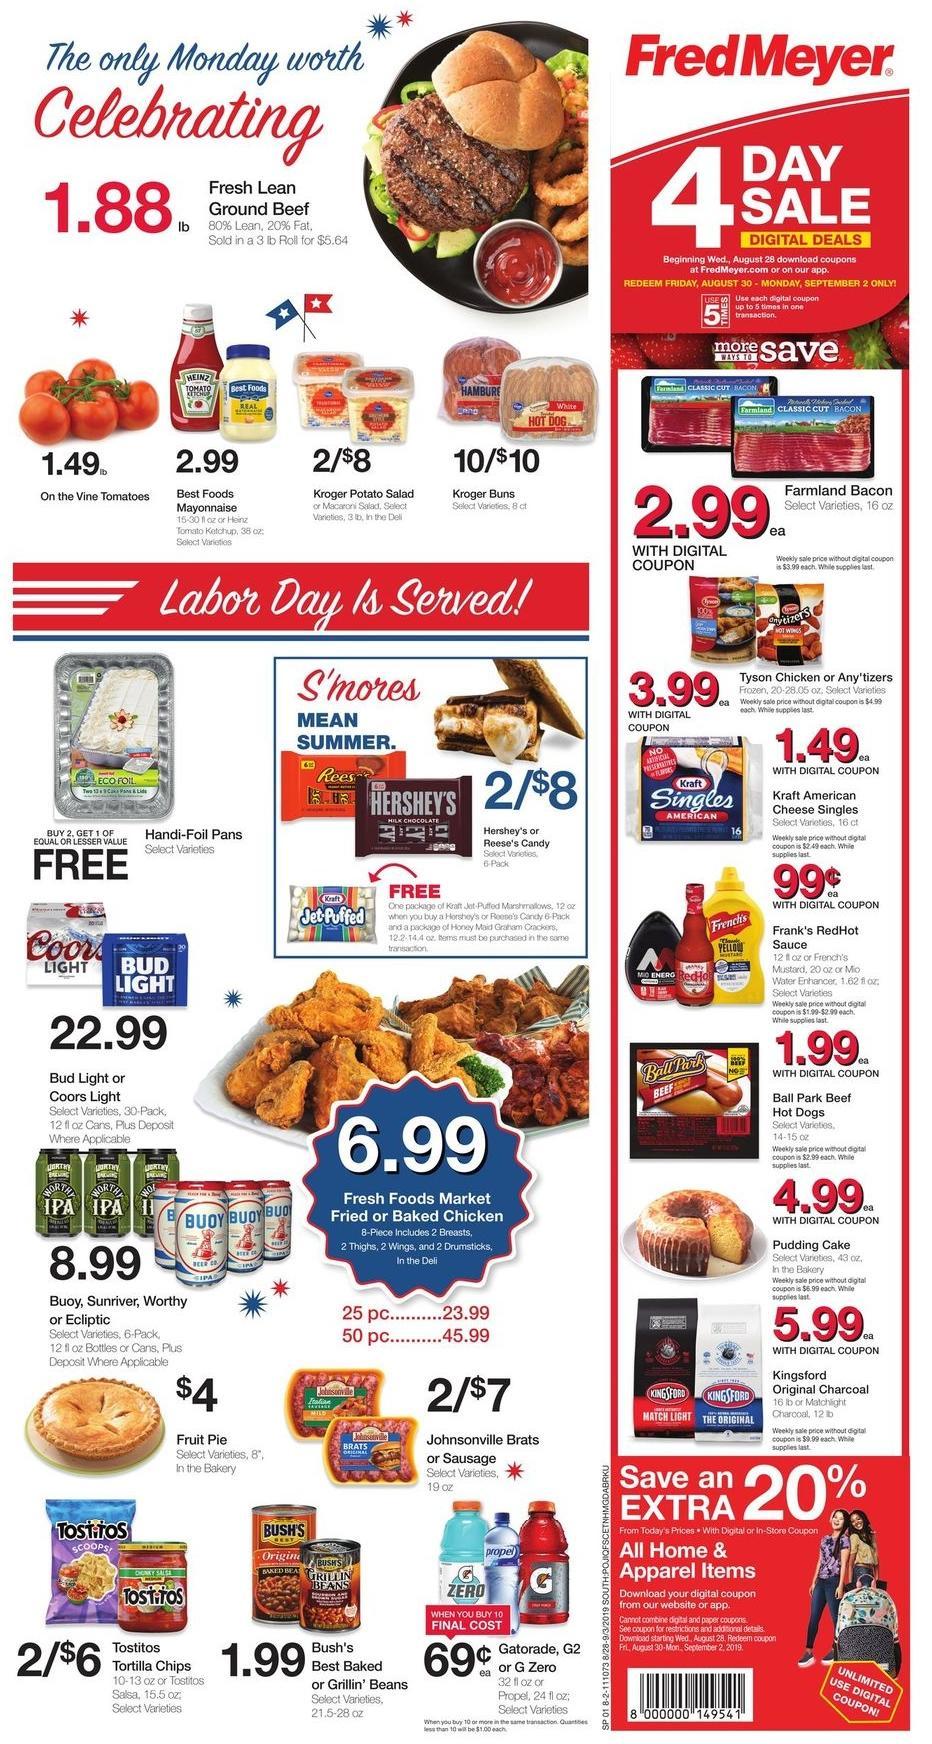 Fred Meyer Weekly Ad from August 28